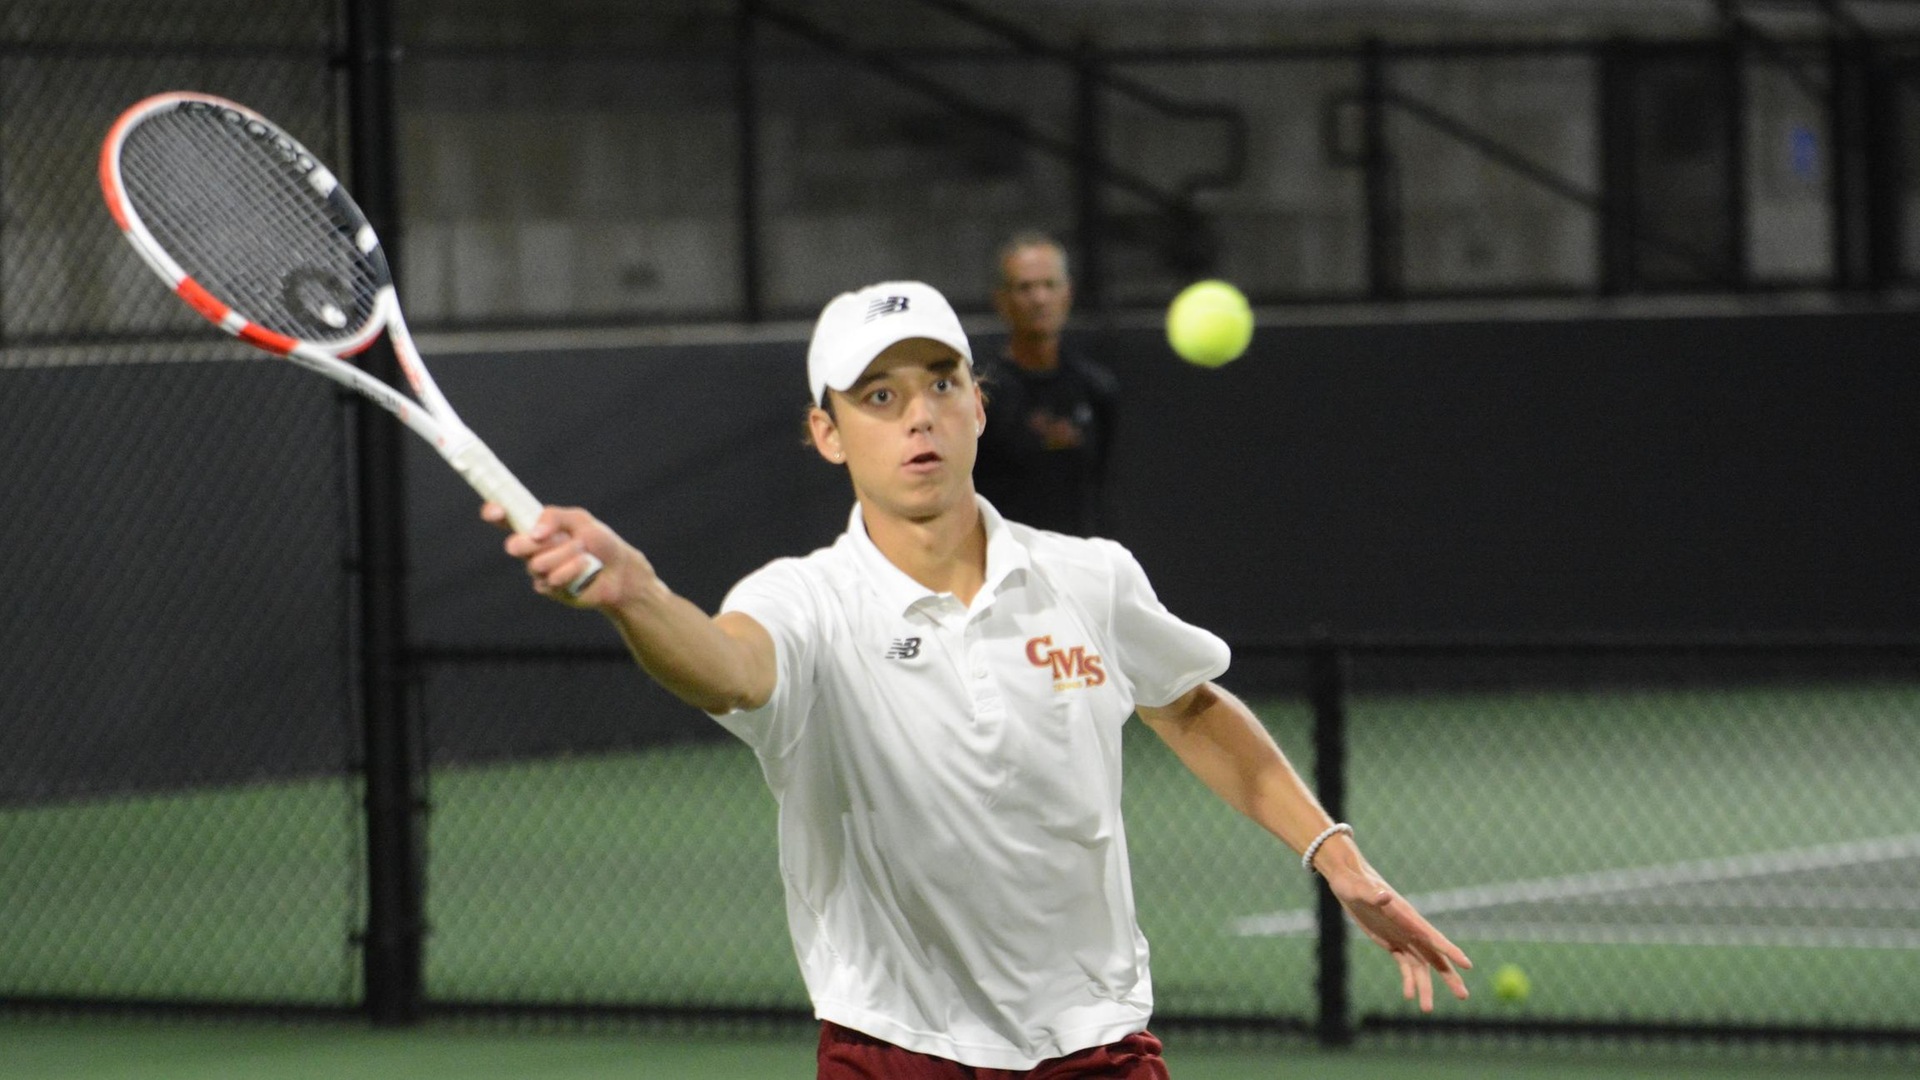 Philp Martin picked up a pair of wins at No. 1 singles